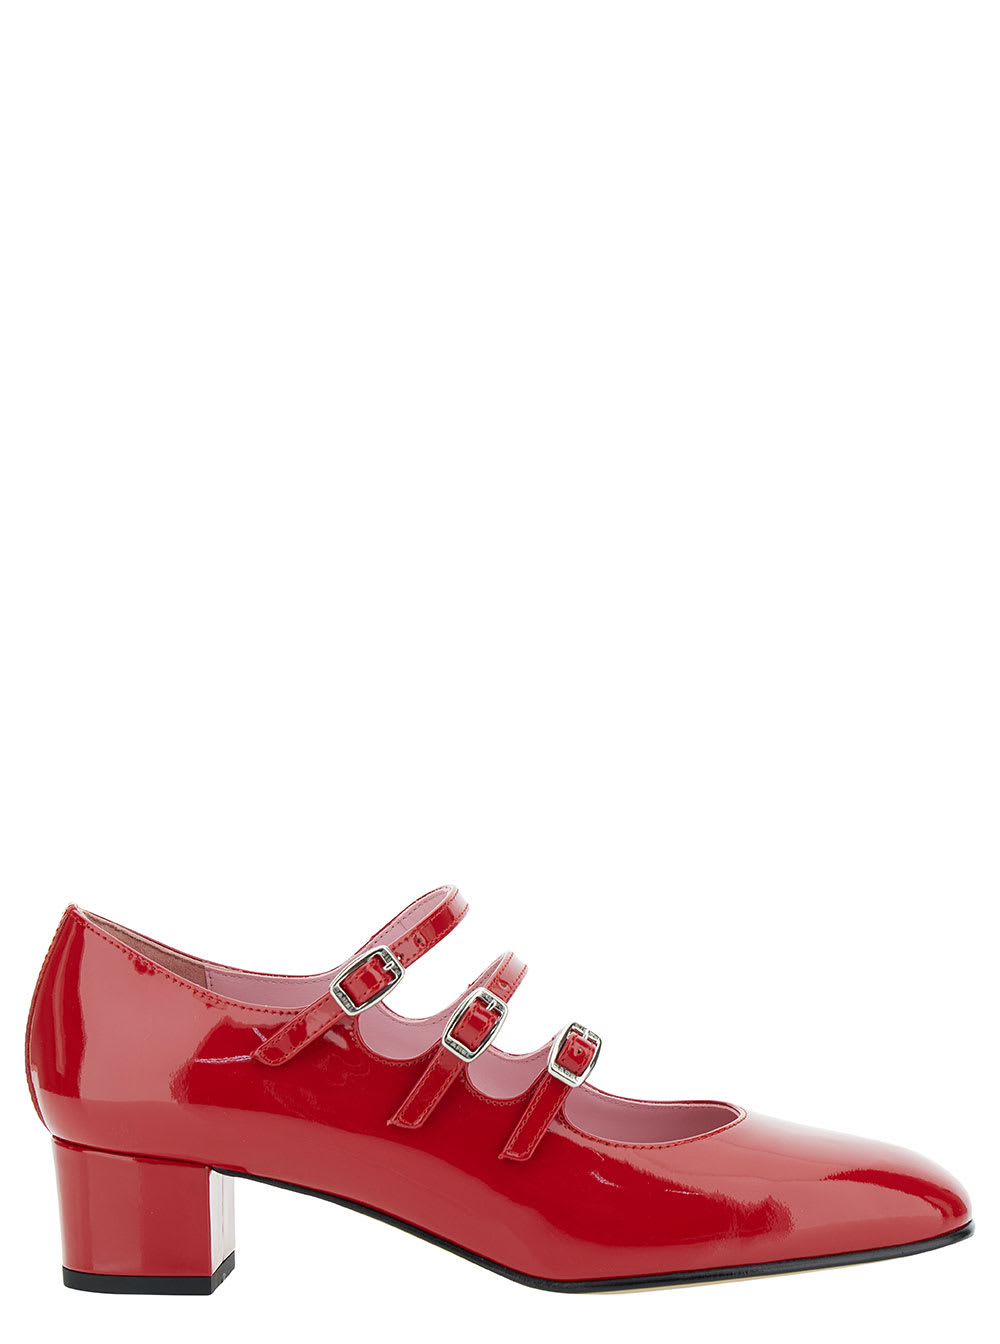 kina Red Mary Janes With Straps And Block Heel In Patent Leather Woman